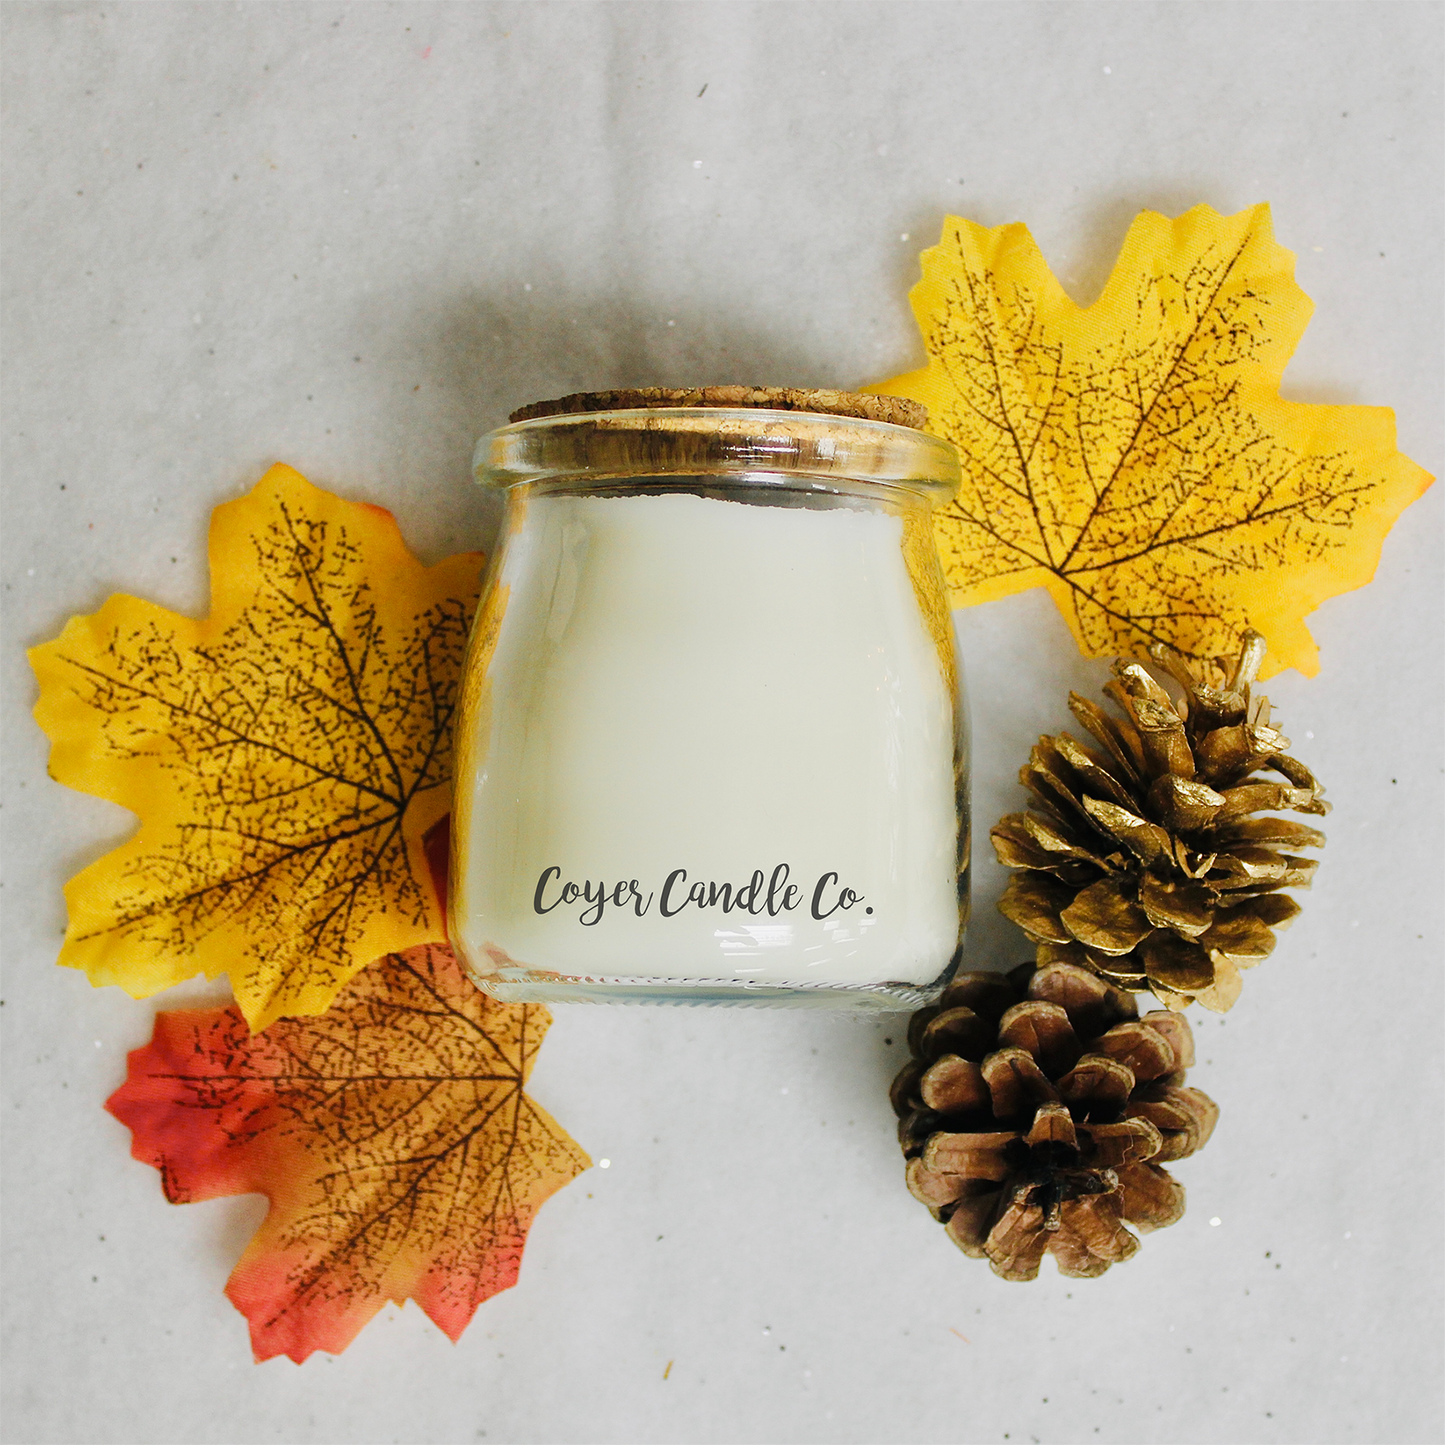 5 oz. Studio Jar with Cork Lid Candle - Fall Collection: Cranberry Spice / Dye-Free